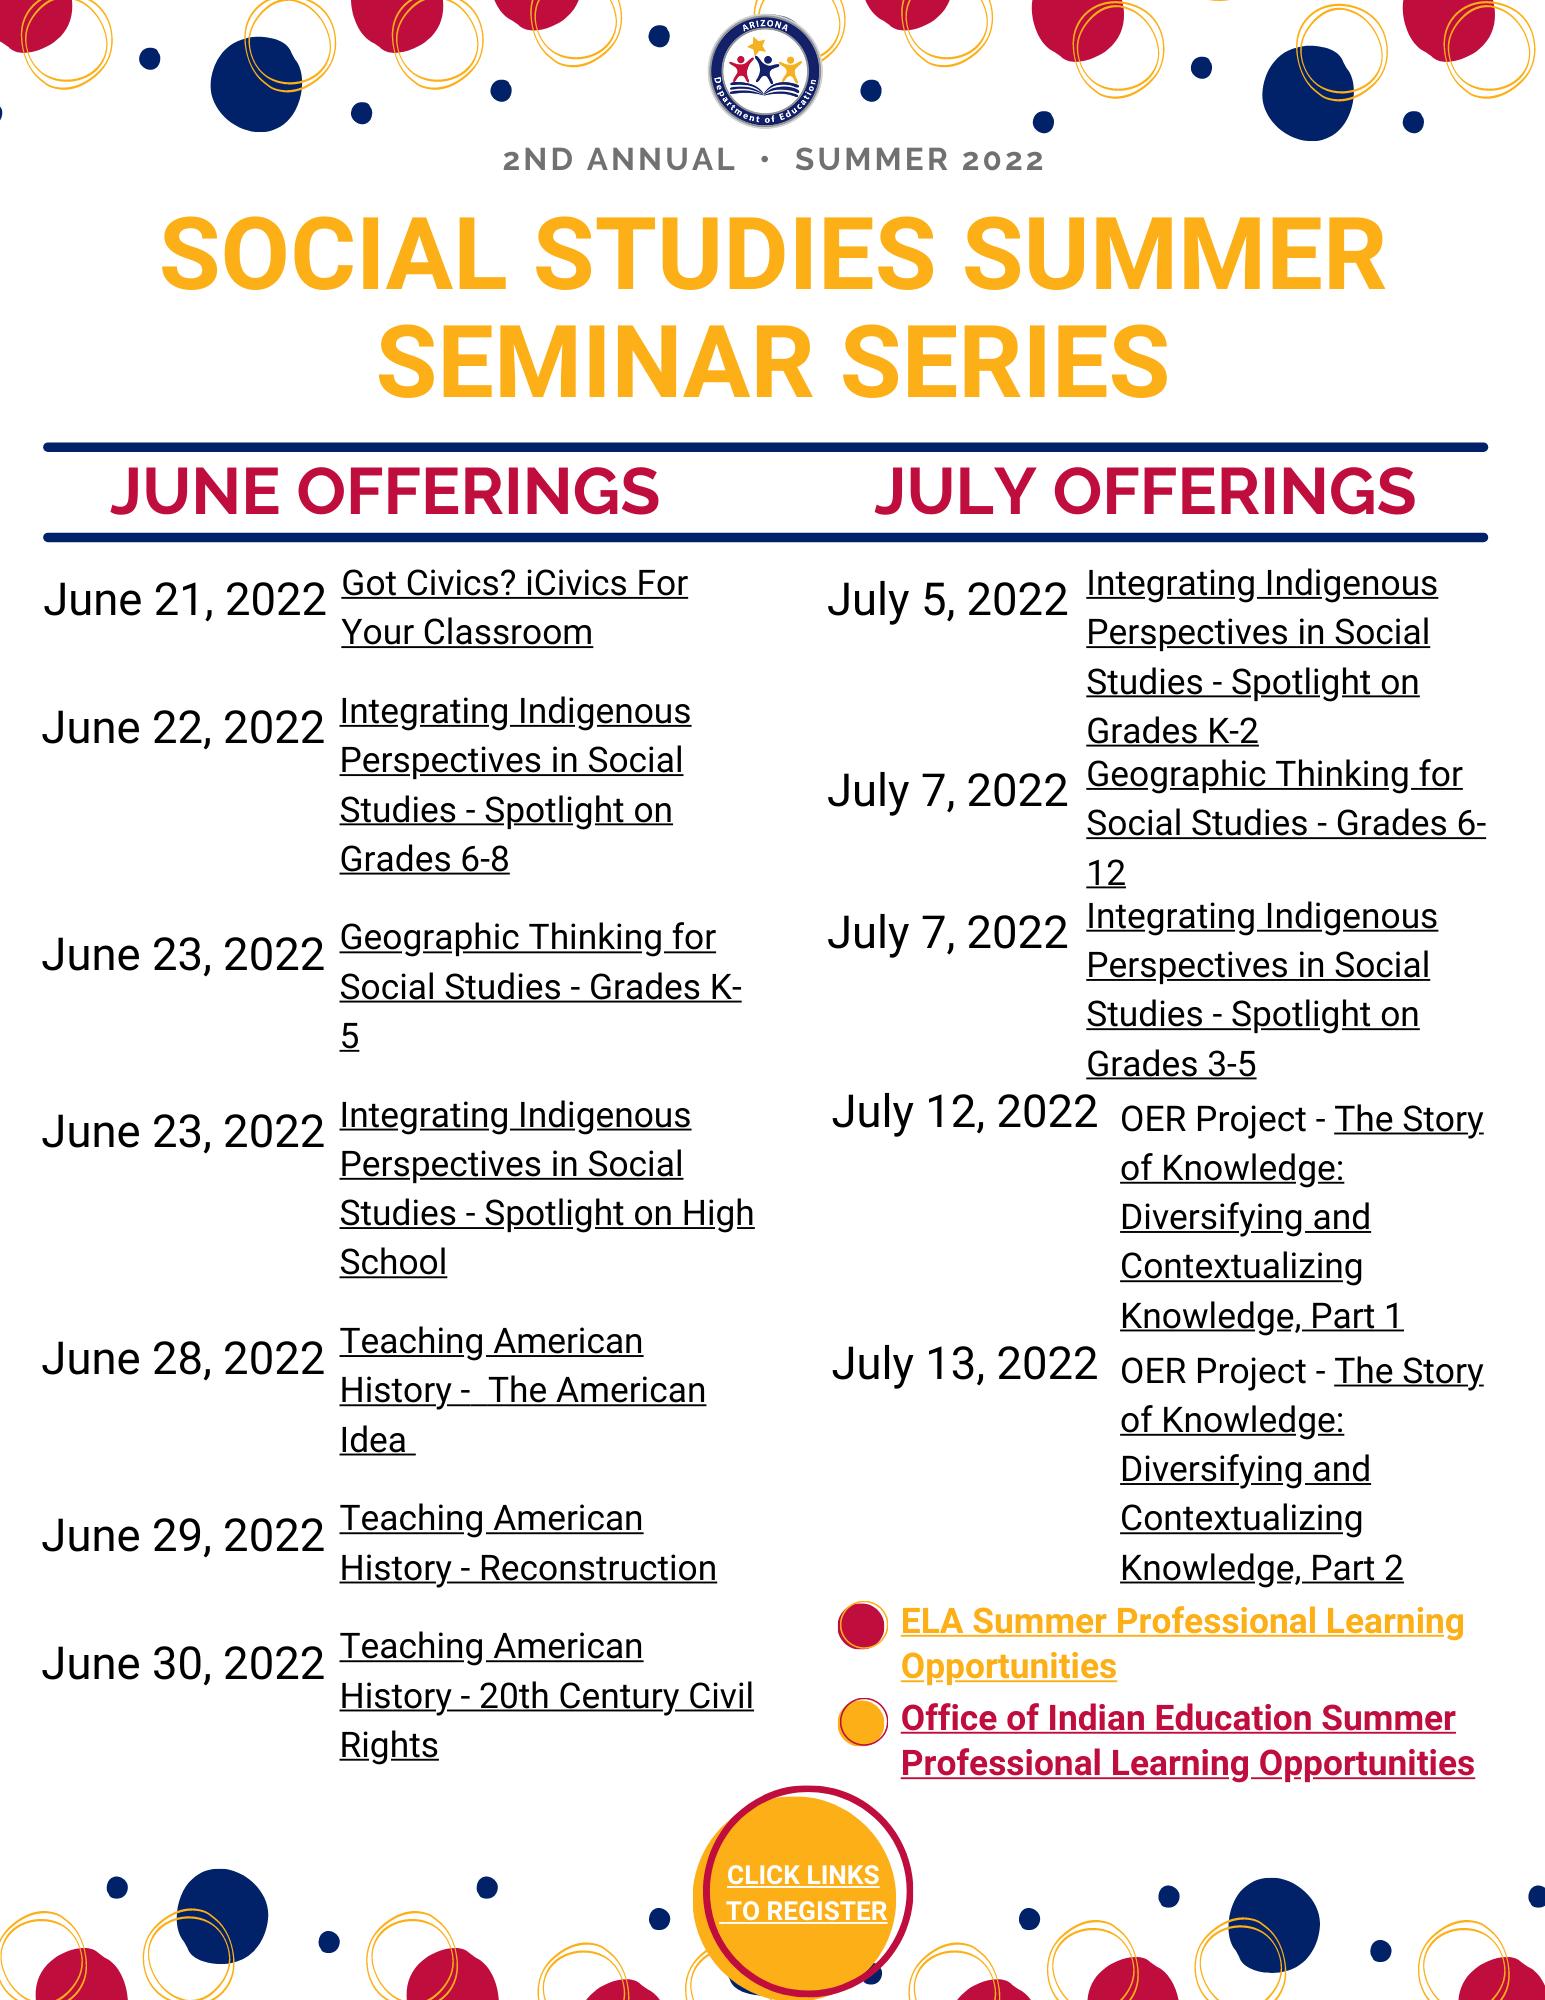 List of Summer Professional learning Opportunities